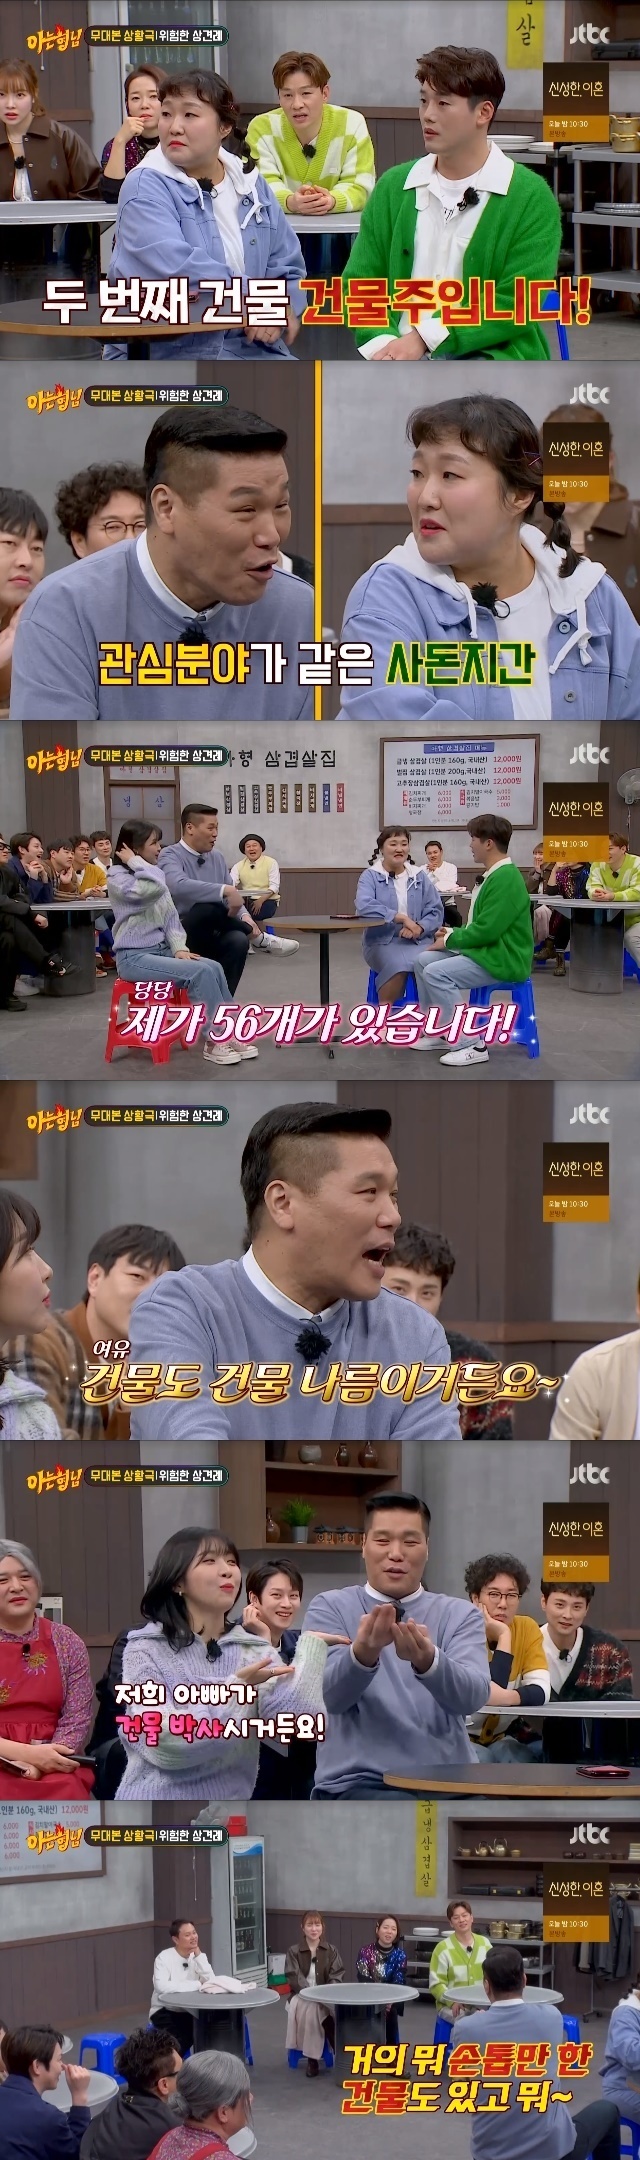 Seo Jang-hoon was able to afford to meet 56 landlords.In the 374th JTBC entertainment Knowing Bros (hereinafter referred to as Knowing Bros), which was broadcast on March 11, SNL crew Jung Sang-hoon, Kim Min-kyo, Jung Il Lee, Kwon Hyuk-soo, Lee Su-ji, Joo Hyun-young,On this day, Seo Jang-hoon was the father of Joo Hyun-young, and Lee Su-ji was the mother of Kwon Hyuk-soo.Seo Jang-hoon asked for a job because Kwon Hyuk-soo was dissatisfied with his son-in-law.Kwon Hyuk-soo, a freelancer, said he was helping his mother Lee Su-ji, and Lee Su-ji boasted that Kwon Hyuk-soo was the second landlord and I have 56 buildings.Kwon Hyuk-soo, who was called prince to Lee Su-ji all the time, was delighted that he did not even know that he was a real prince.On the other hand, Seo Jang-hoon showed off his expertise, saying, Buildings are different depending on the building. There are some nails. Joo Hyun-young boasted, My father is a building doctor.